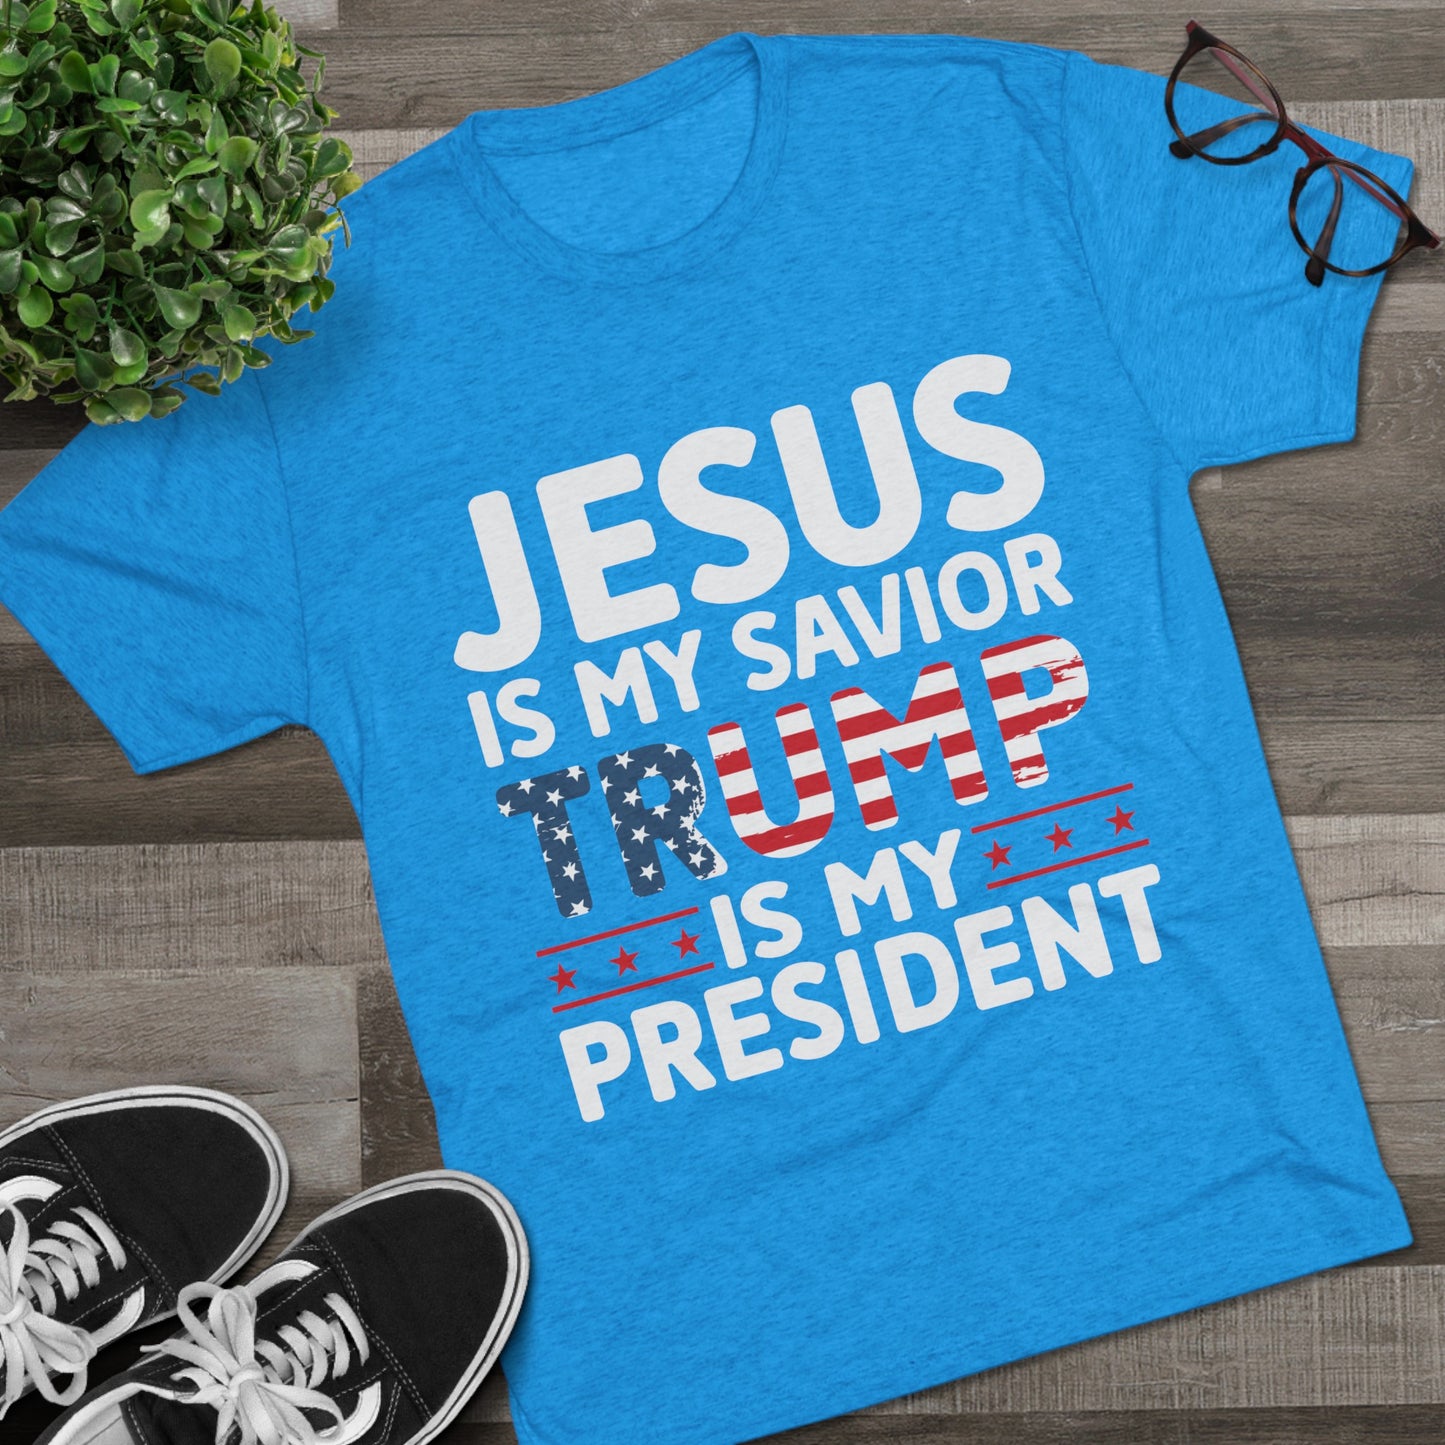 Get trendy with Jesus is My Savior, Trump is my President Unisex Tri-Blend Crew Tee - T-Shirt available at Good Gift Company. Grab yours for $21.88 today!